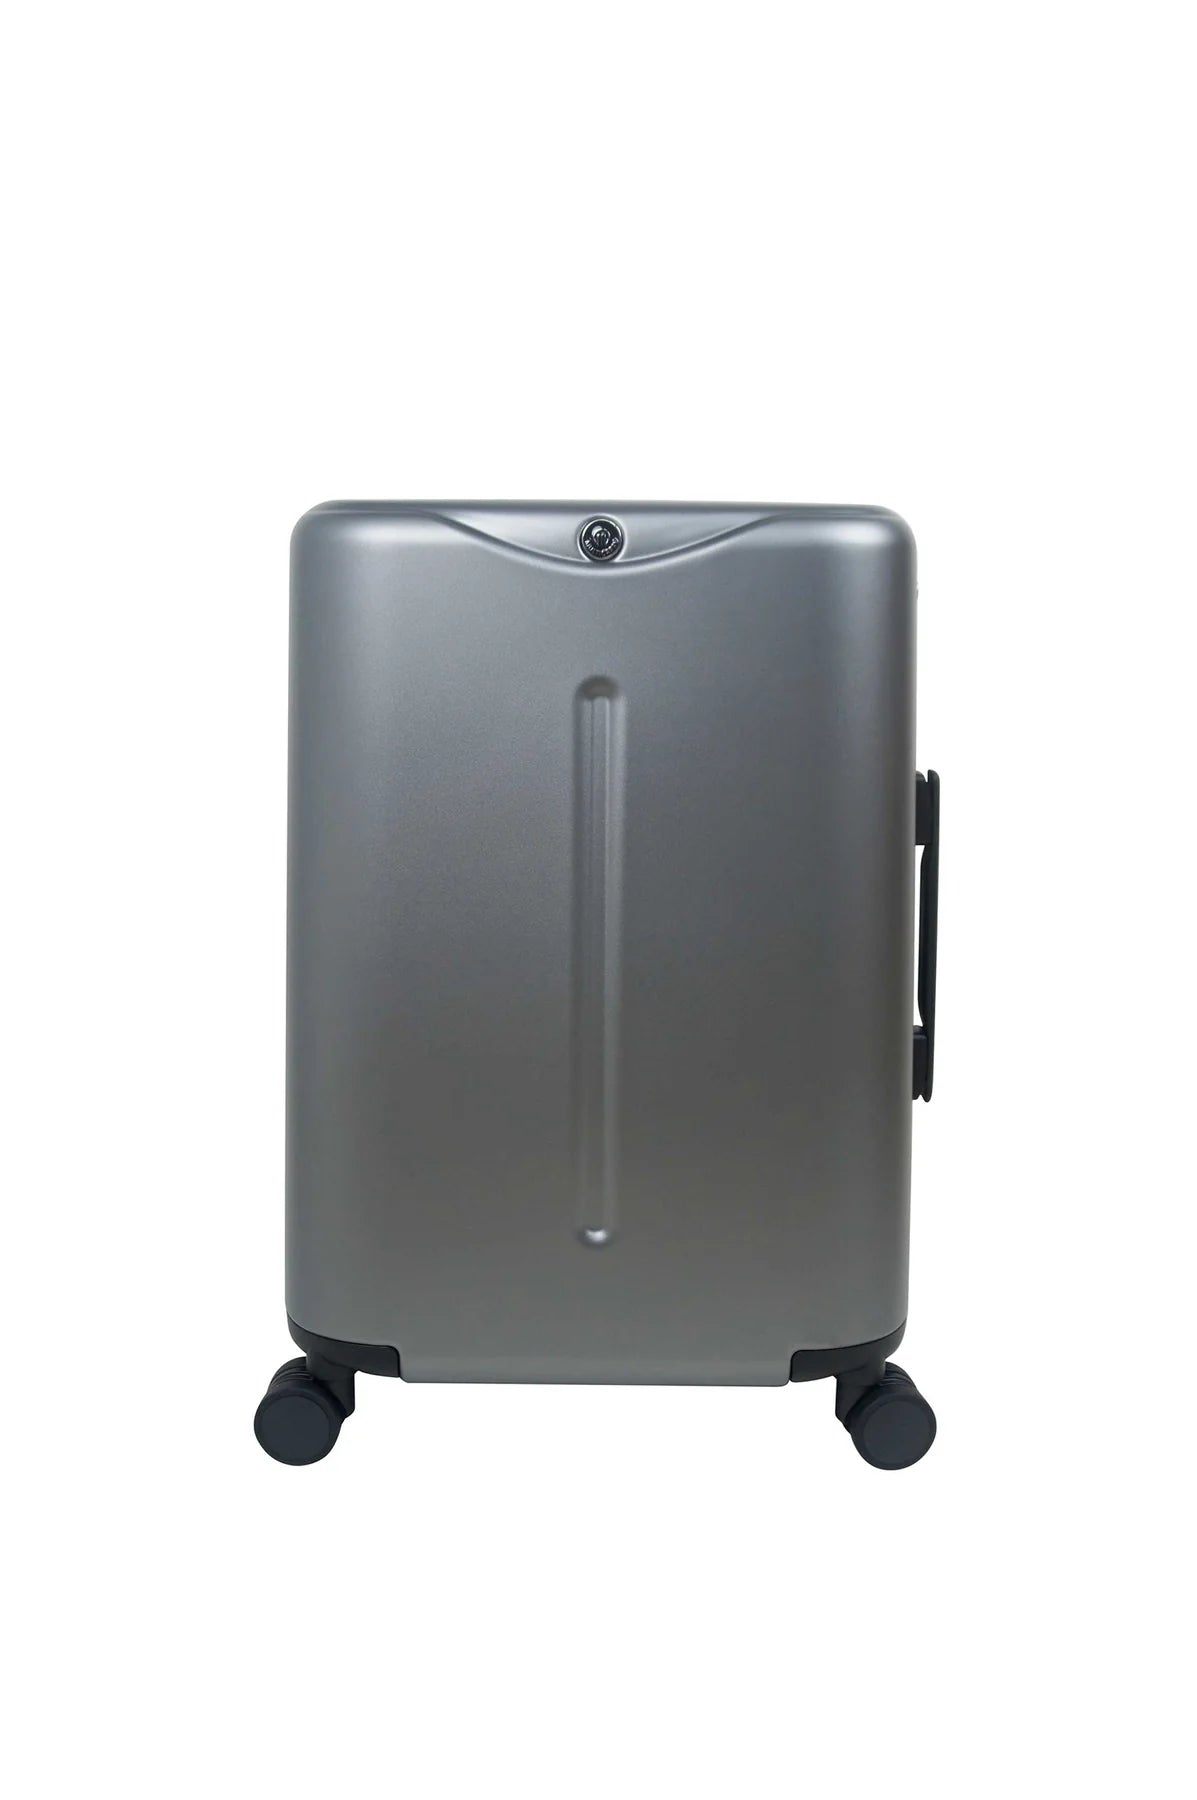 Miamily MultiCarry Ride-On Luggage (Mist Grey) 18" - Charcoal Grey  (PRE-ORDER END JUNE ARRIVAL)